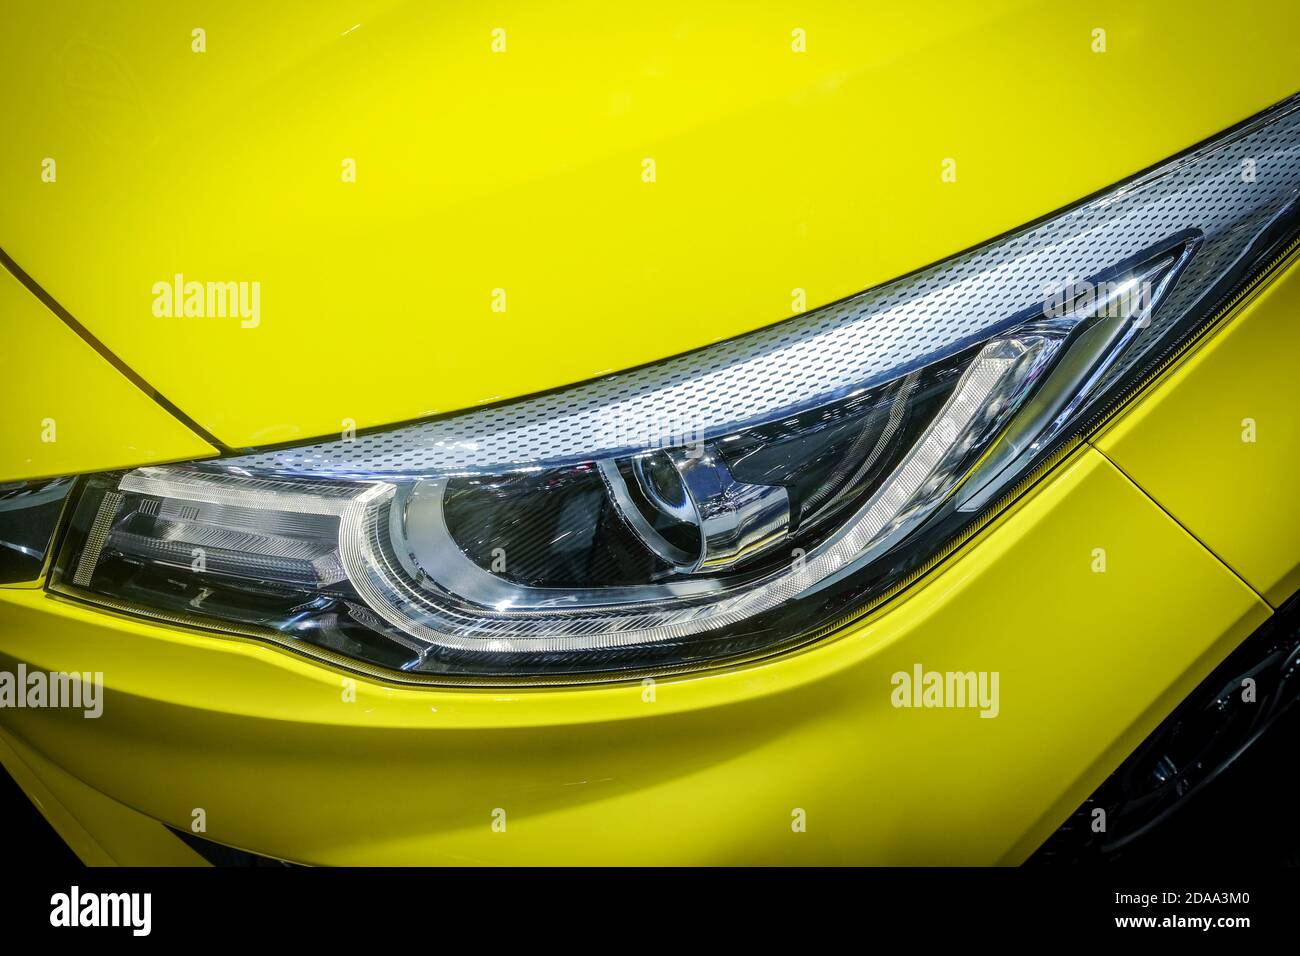 Close-up LED xenon headlight of yellow modern car with halogen lamp technology for illuminate both day and night. Stock Photo